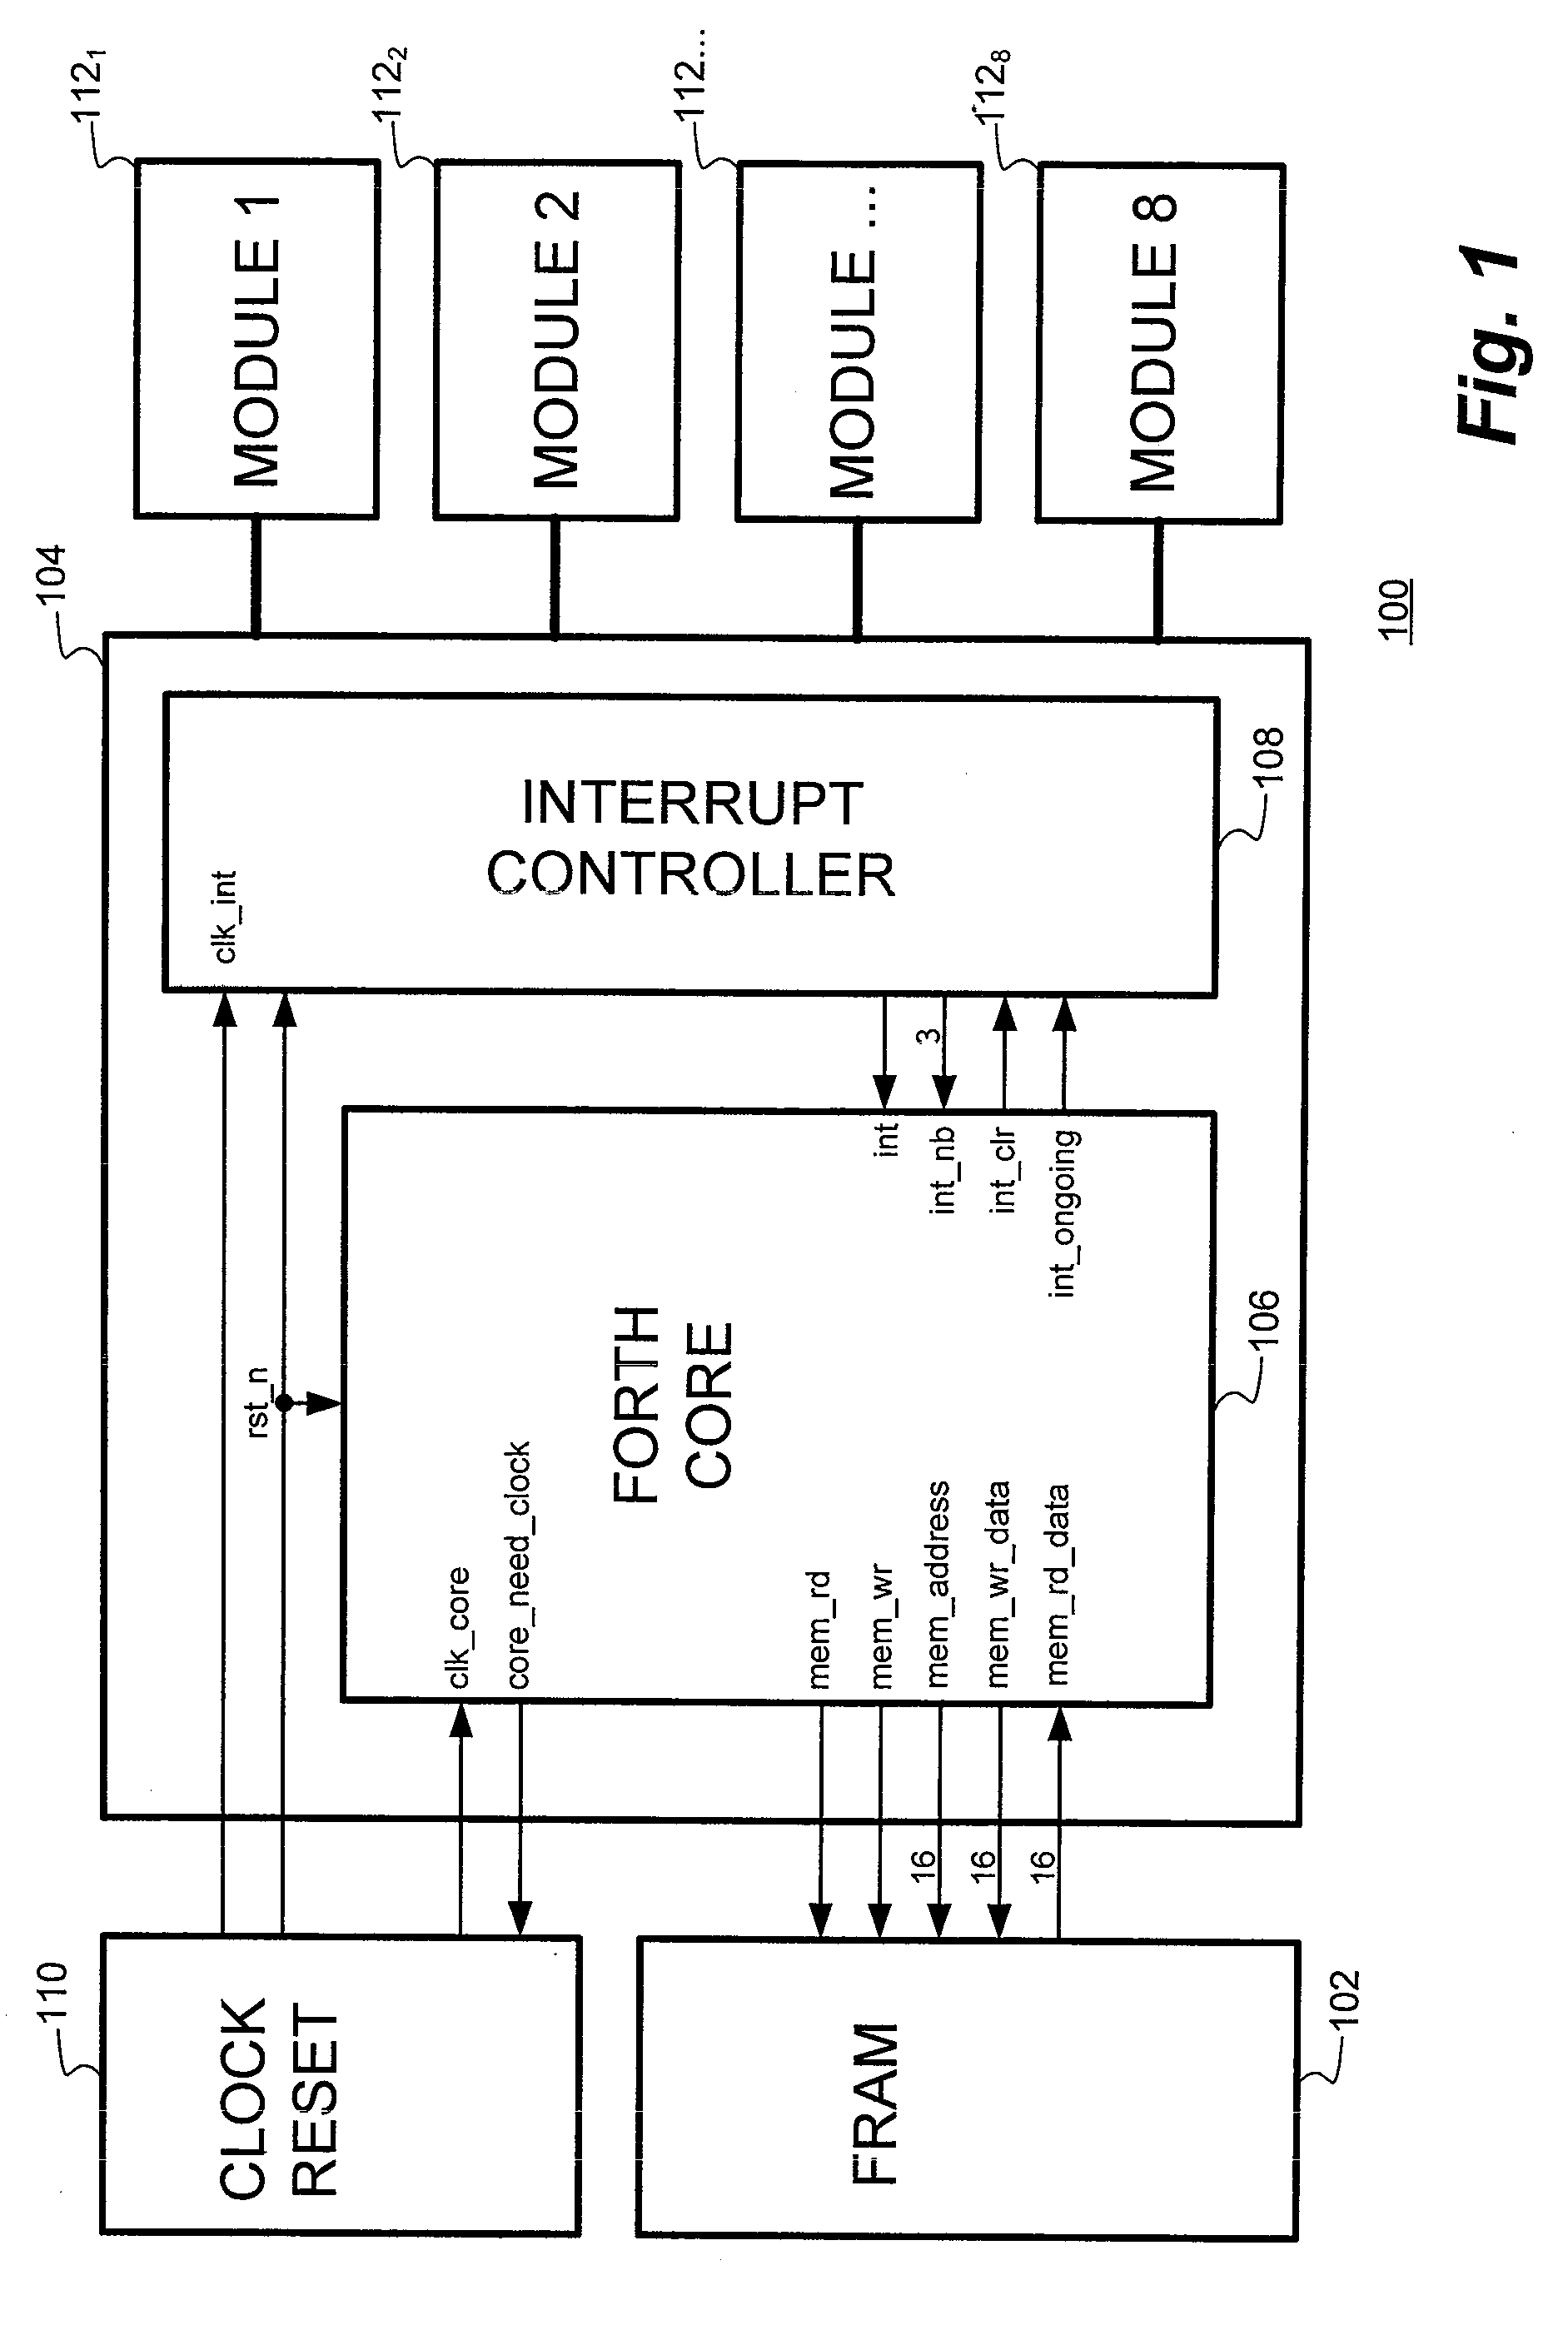 Stack processor using a ferroelectric random access memory (F-RAM) for code space and a portion of the stack memory space having an instruction set optimized to minimize processor stack accesses